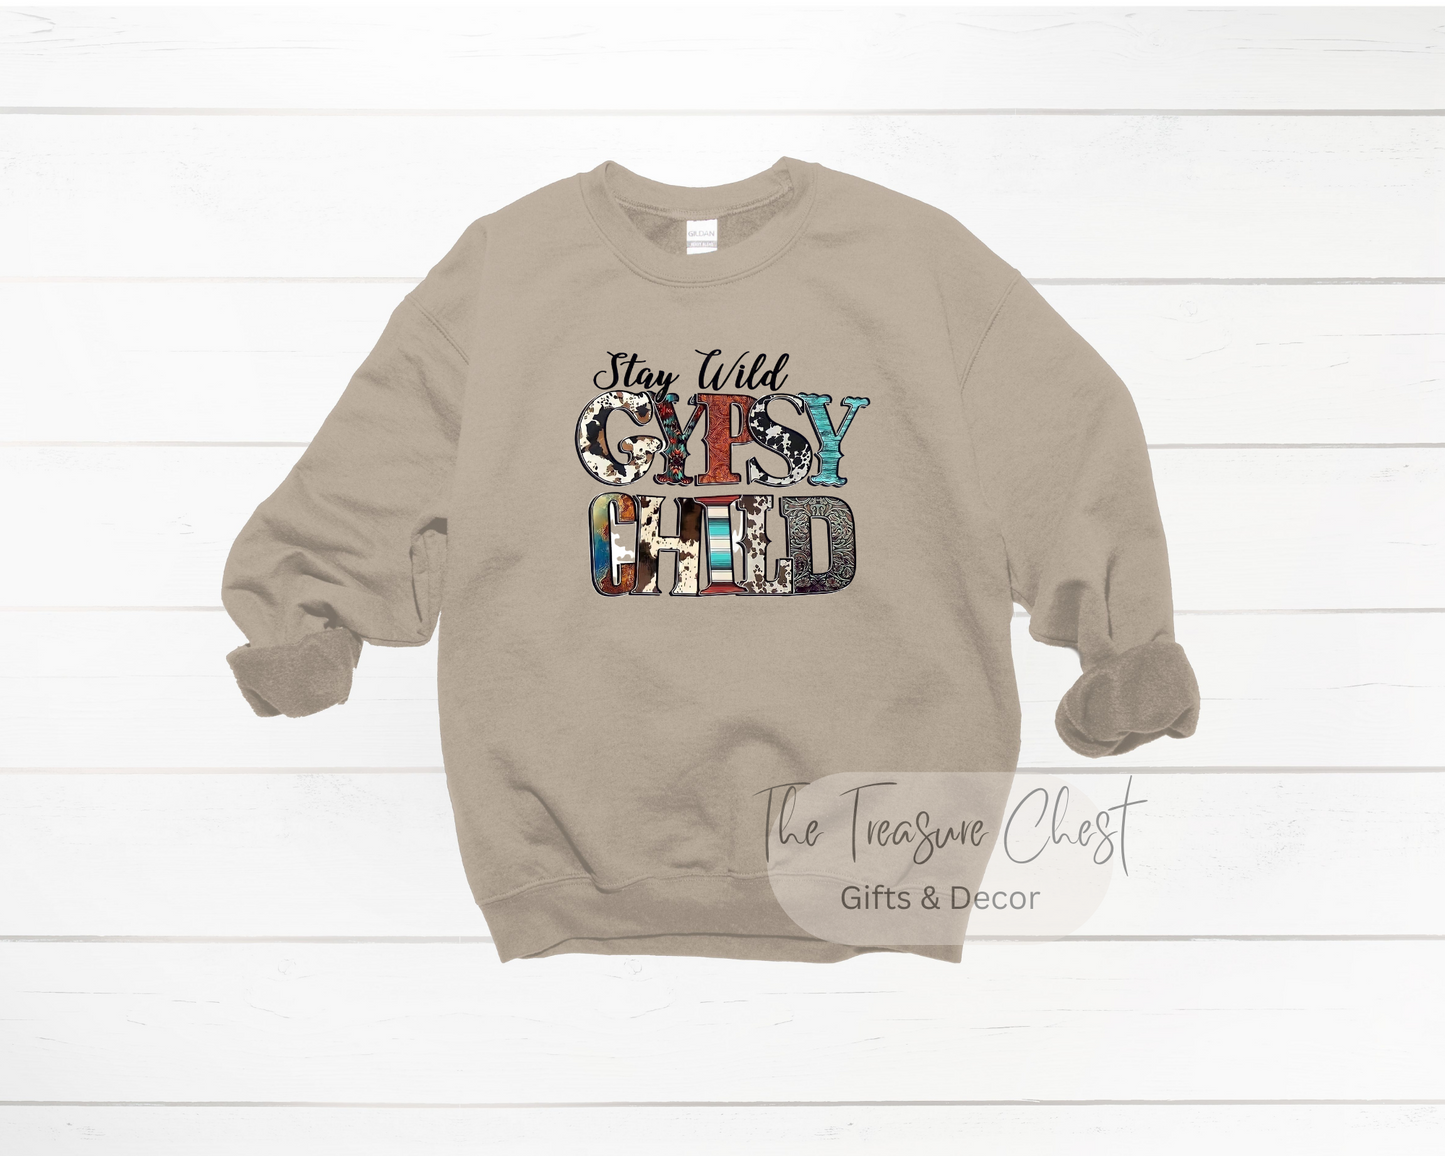 Introducing the Stay Wild Gypsy Child Crewneck Sweatshirt - the perfect way to express your wild side! This cozy and stylish sweatshirt features a classic crewneck cut that's perfect for layering over any outfit. It's made from a high-quality cotton-poly blend for a comfortable fit that's both warm and breathable. Sand In colour